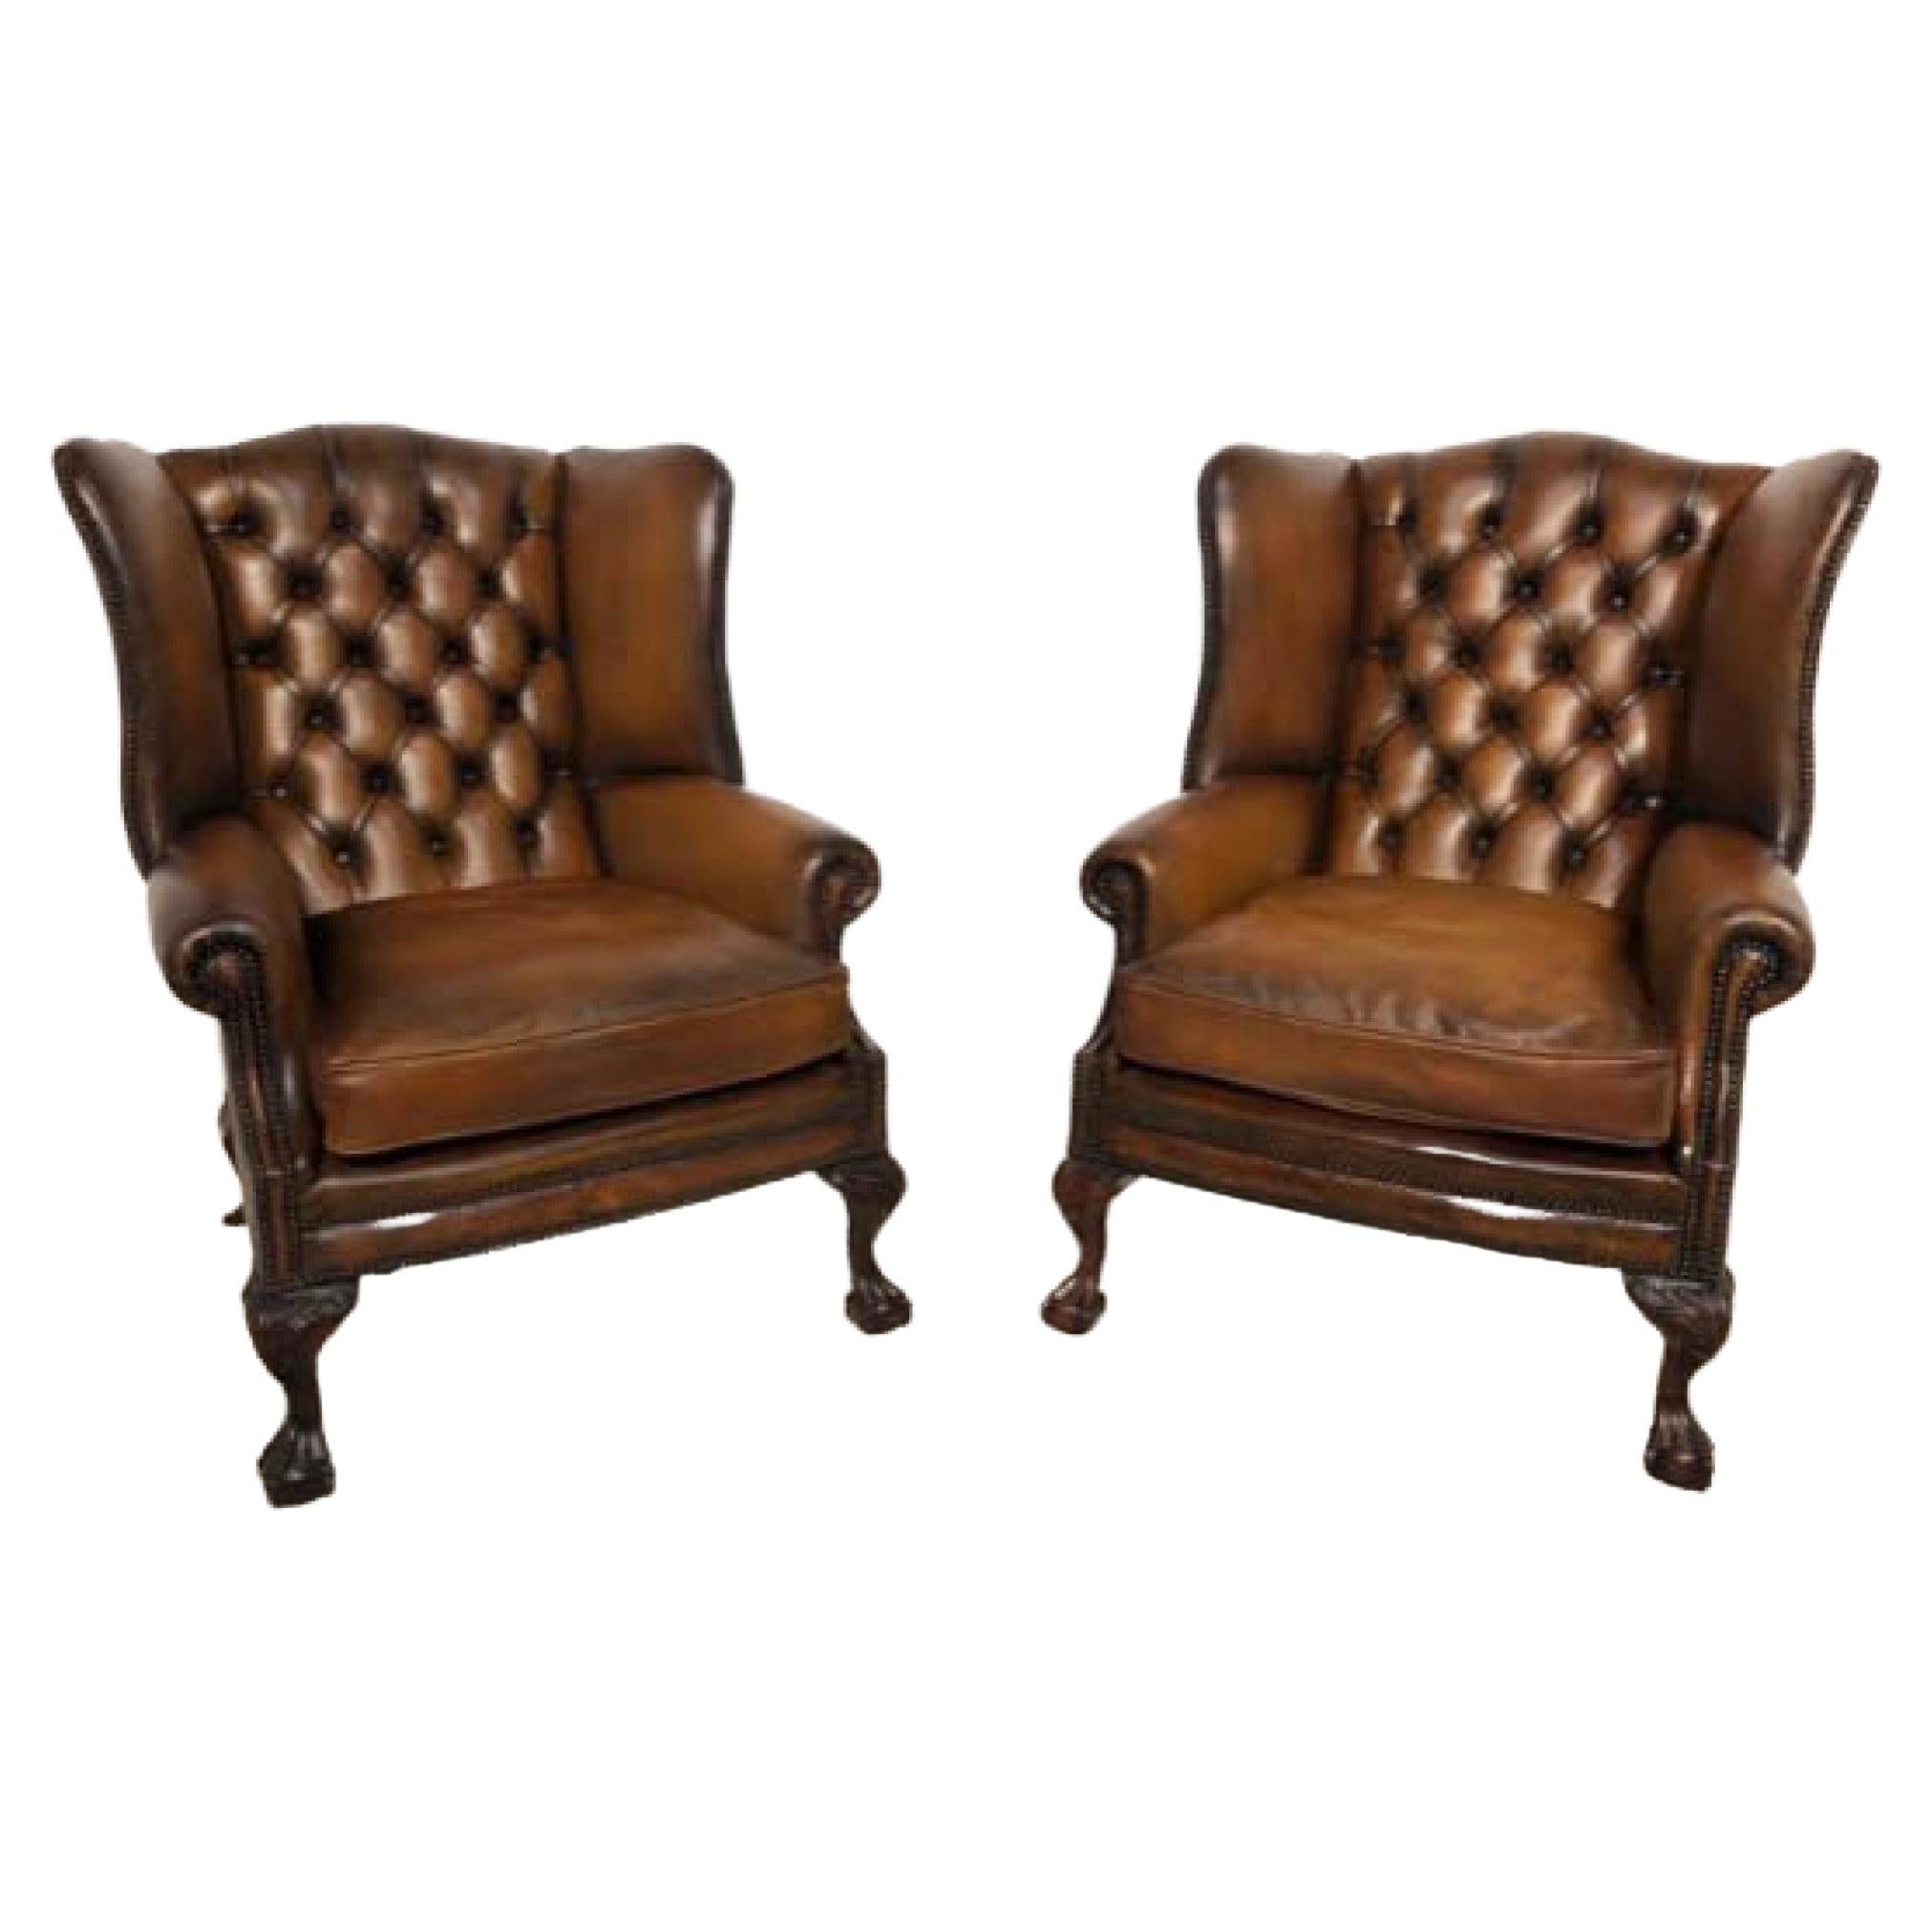 Pair Chesterfield Leather Chairs - Wingback Victorian Deep Button For Sale